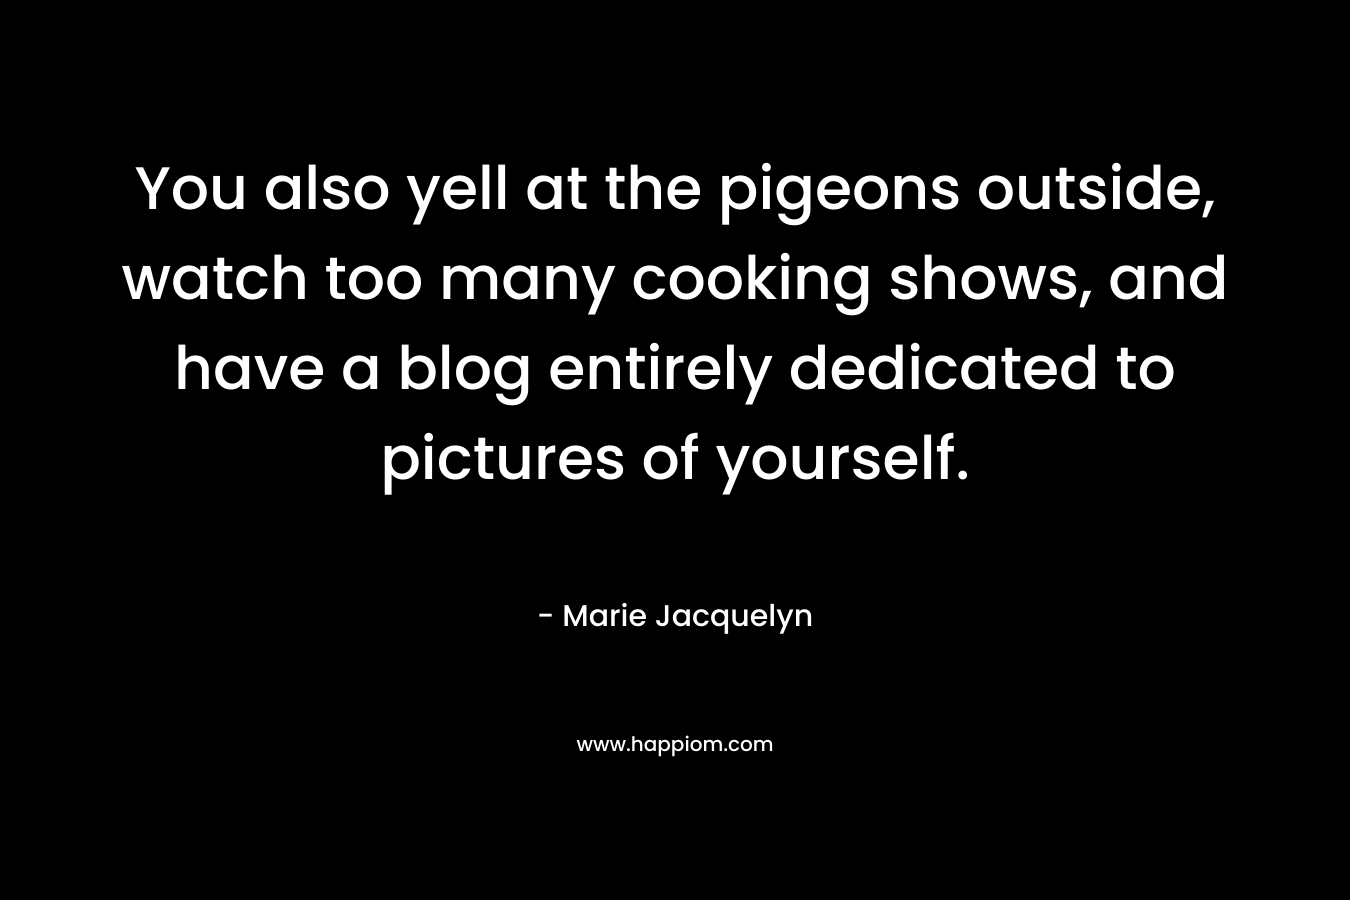 You also yell at the pigeons outside, watch too many cooking shows, and have a blog entirely dedicated to pictures of yourself. – Marie Jacquelyn